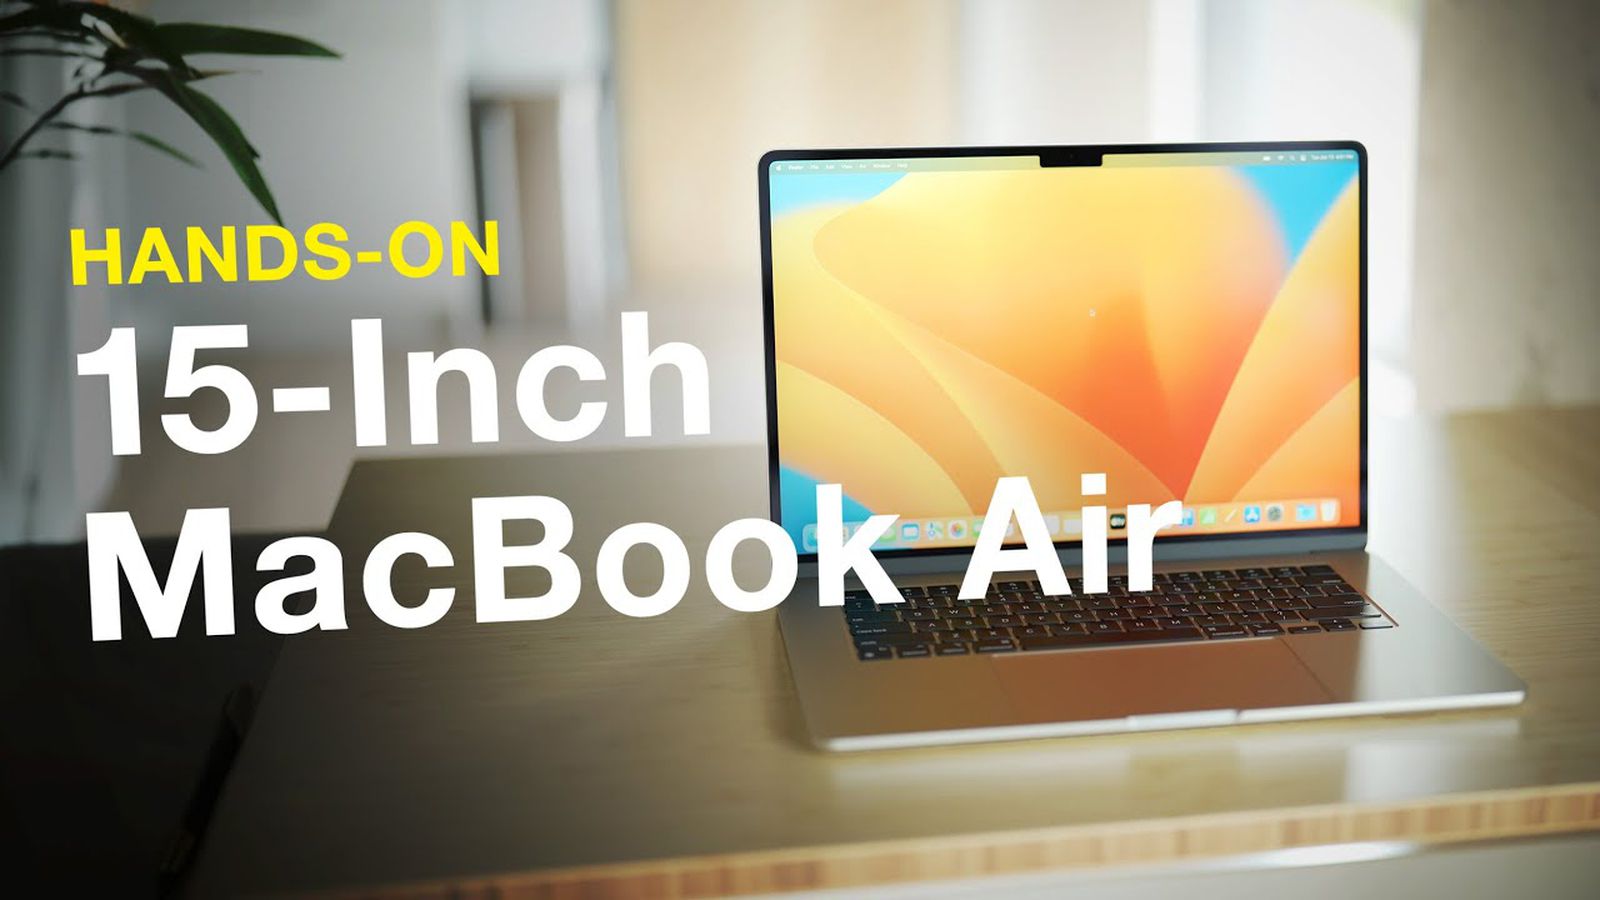 Apple Announces New MacBook Air With 15.3-inch Display and M2 Chip Starting  at $1,299 - MacRumors